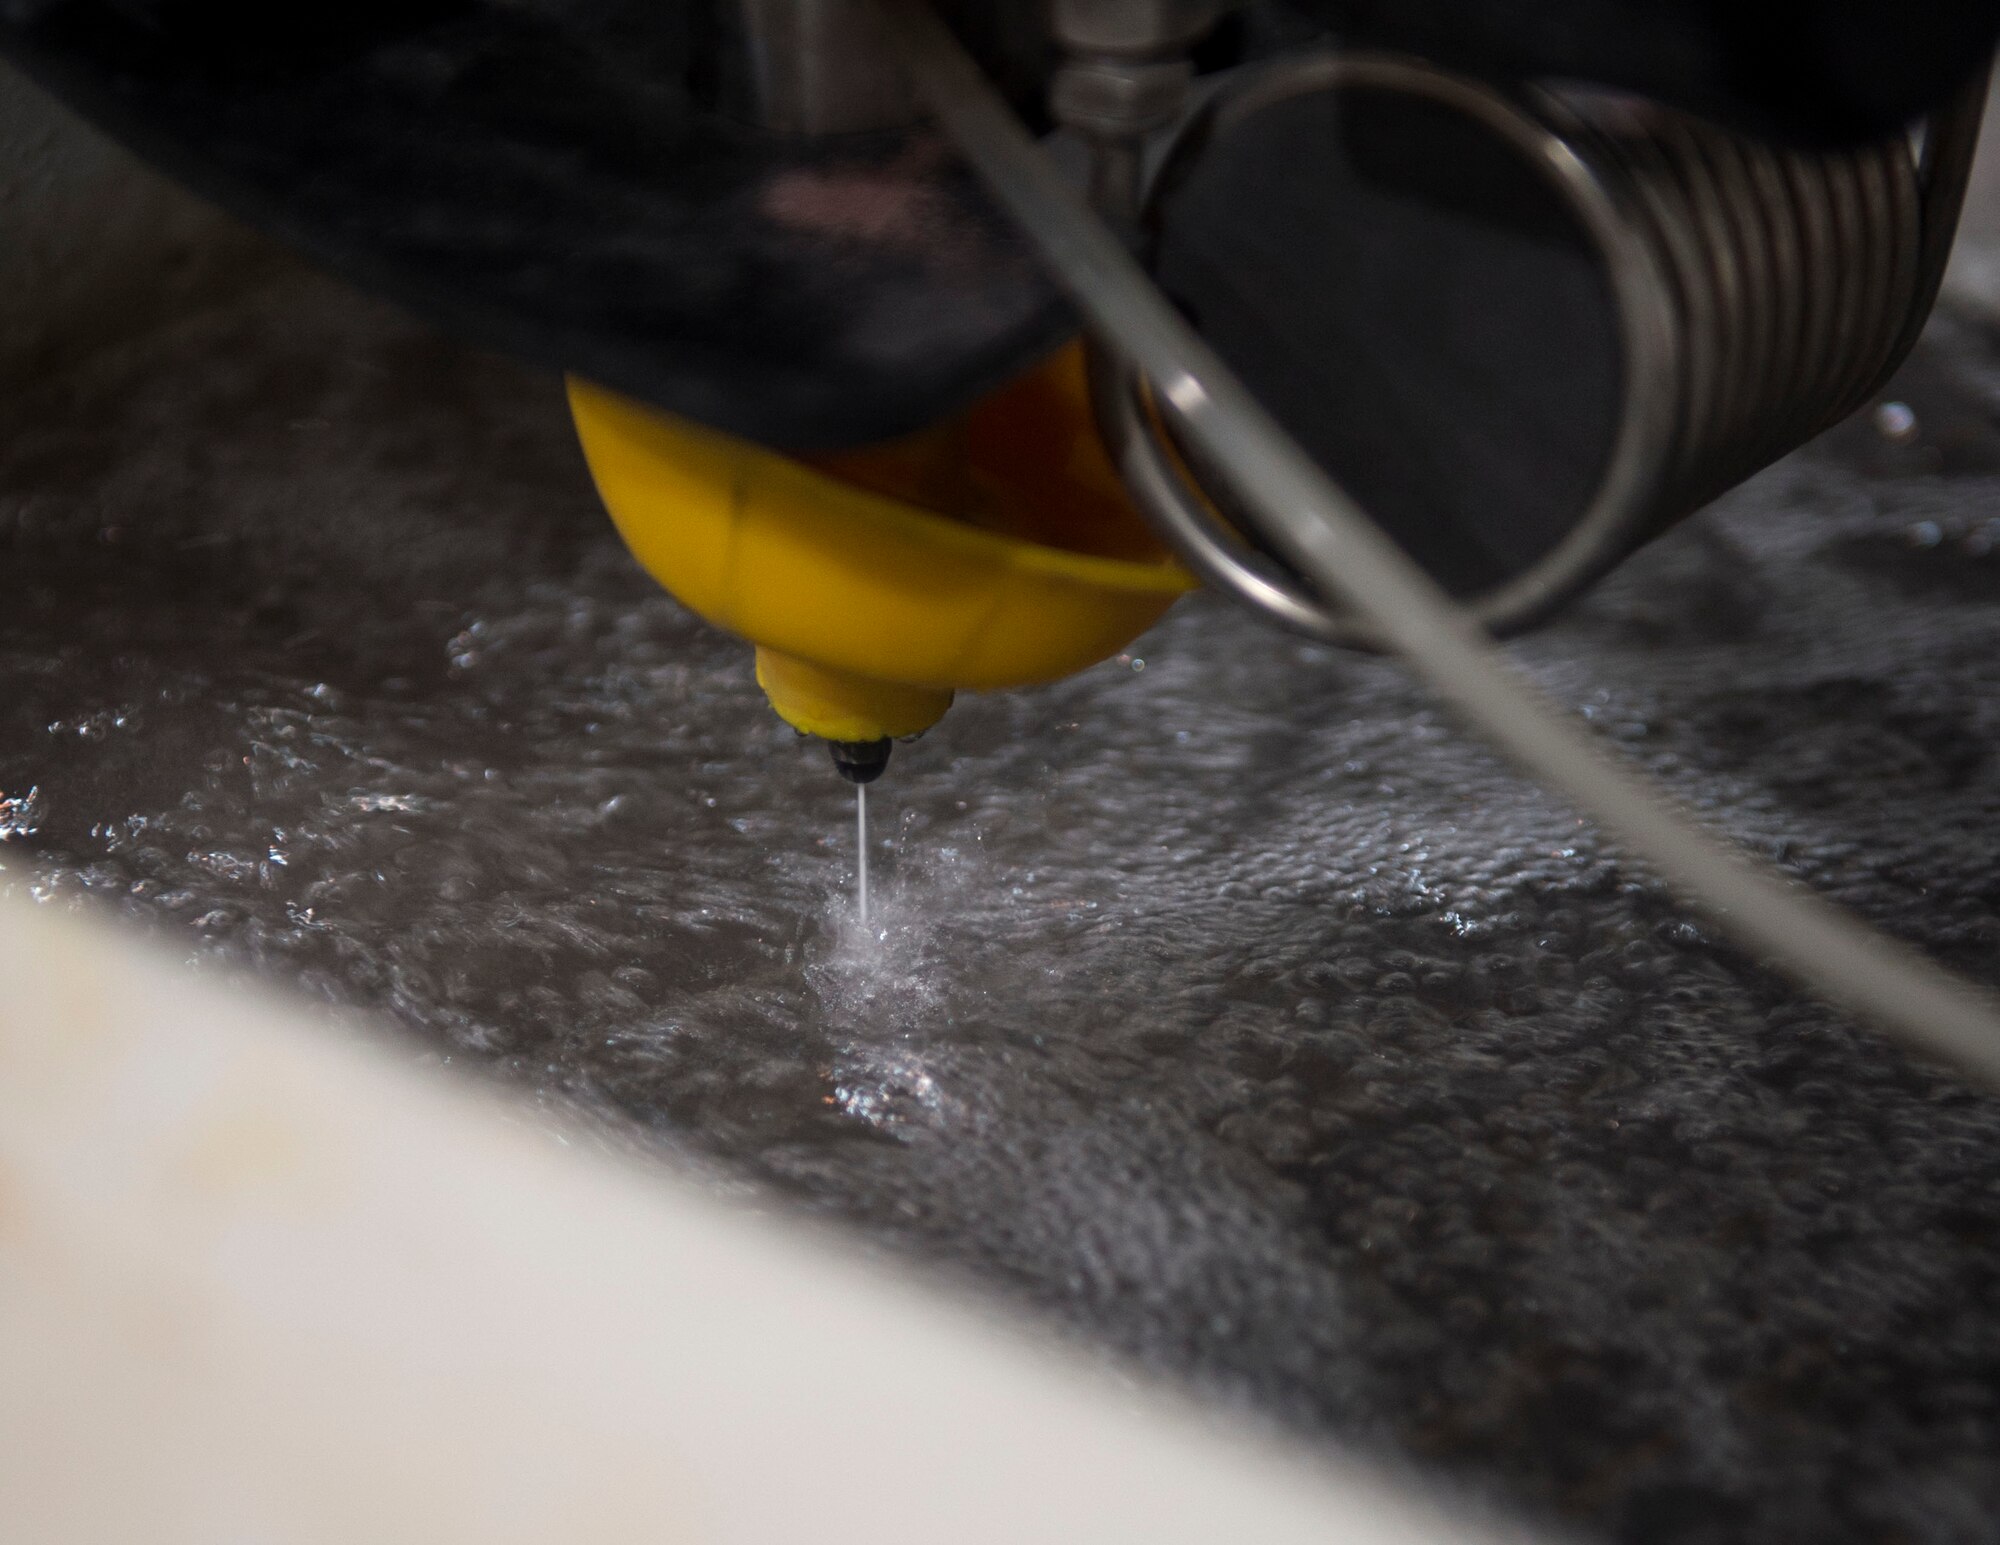 The abrasive waterjet cutting machine located in the fabrication shop of the 379th Expeditionary Maintenance Squadron uses a high velocity coherent stream of 98% water and 2% sand to cut through almost any material at Al Udeid Air Base, Qatar, June 5, 2017. The abrasive waterjet cutting machine allows the airmen to create a wide range of aircraft parts or tools needed to complete the mission in an expedited and a cost effective manner. (U.S. Air Force photo by Tech. Sgt. Amy M. Lovgren)